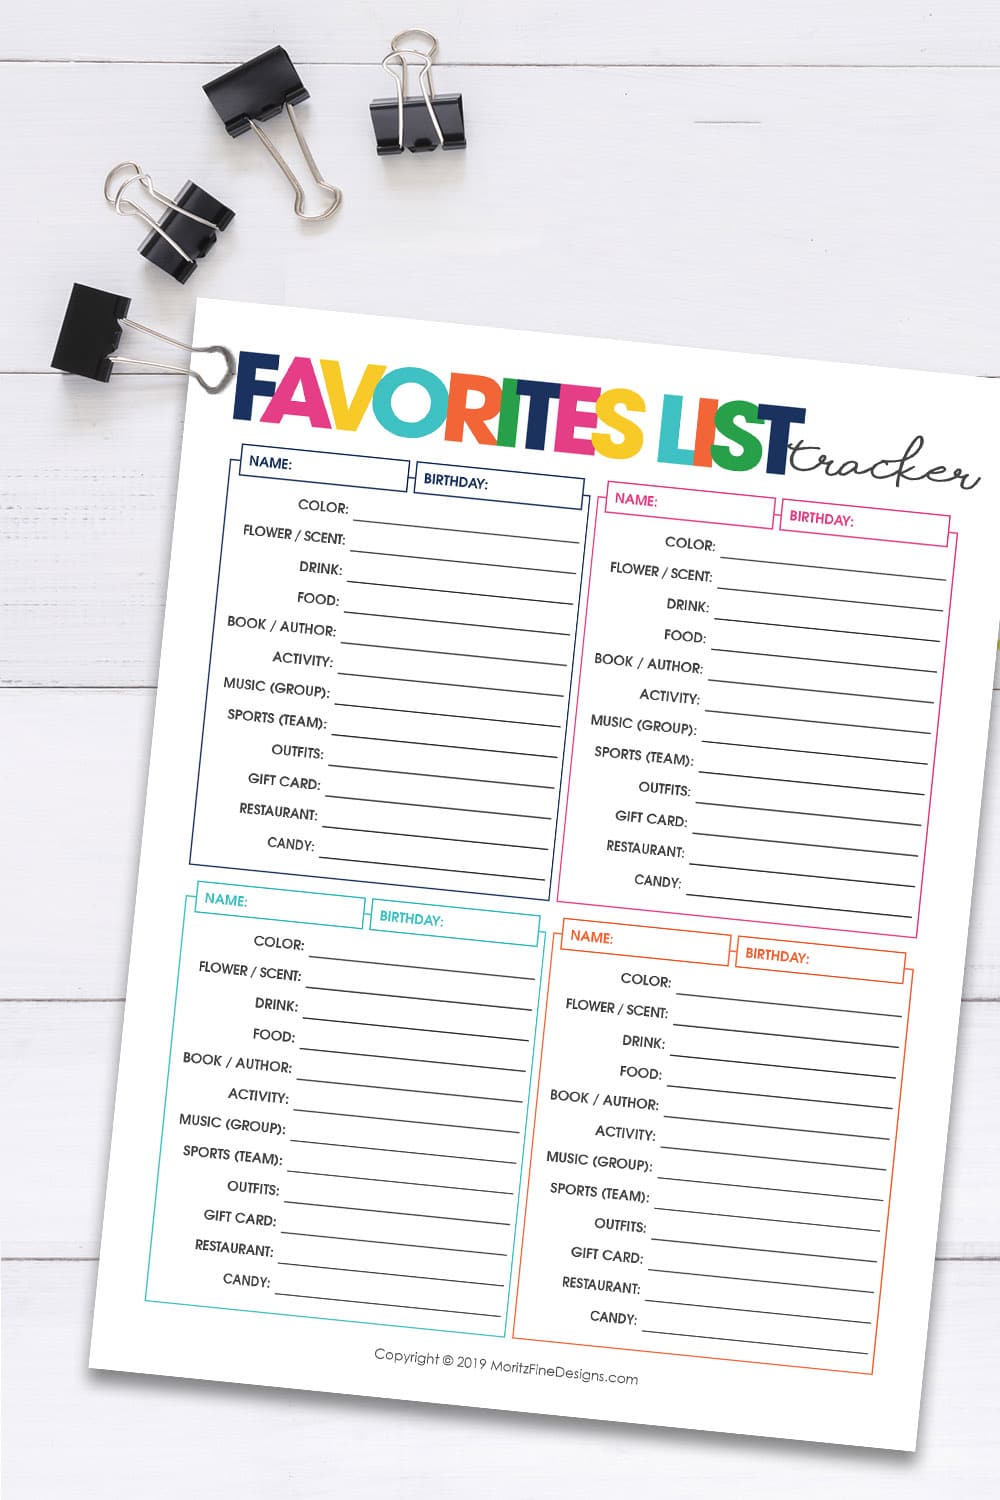 Gifting to your family & friends is hard when you don't know what they love. This free printable Favorites List keeps track of all of their favorite things!